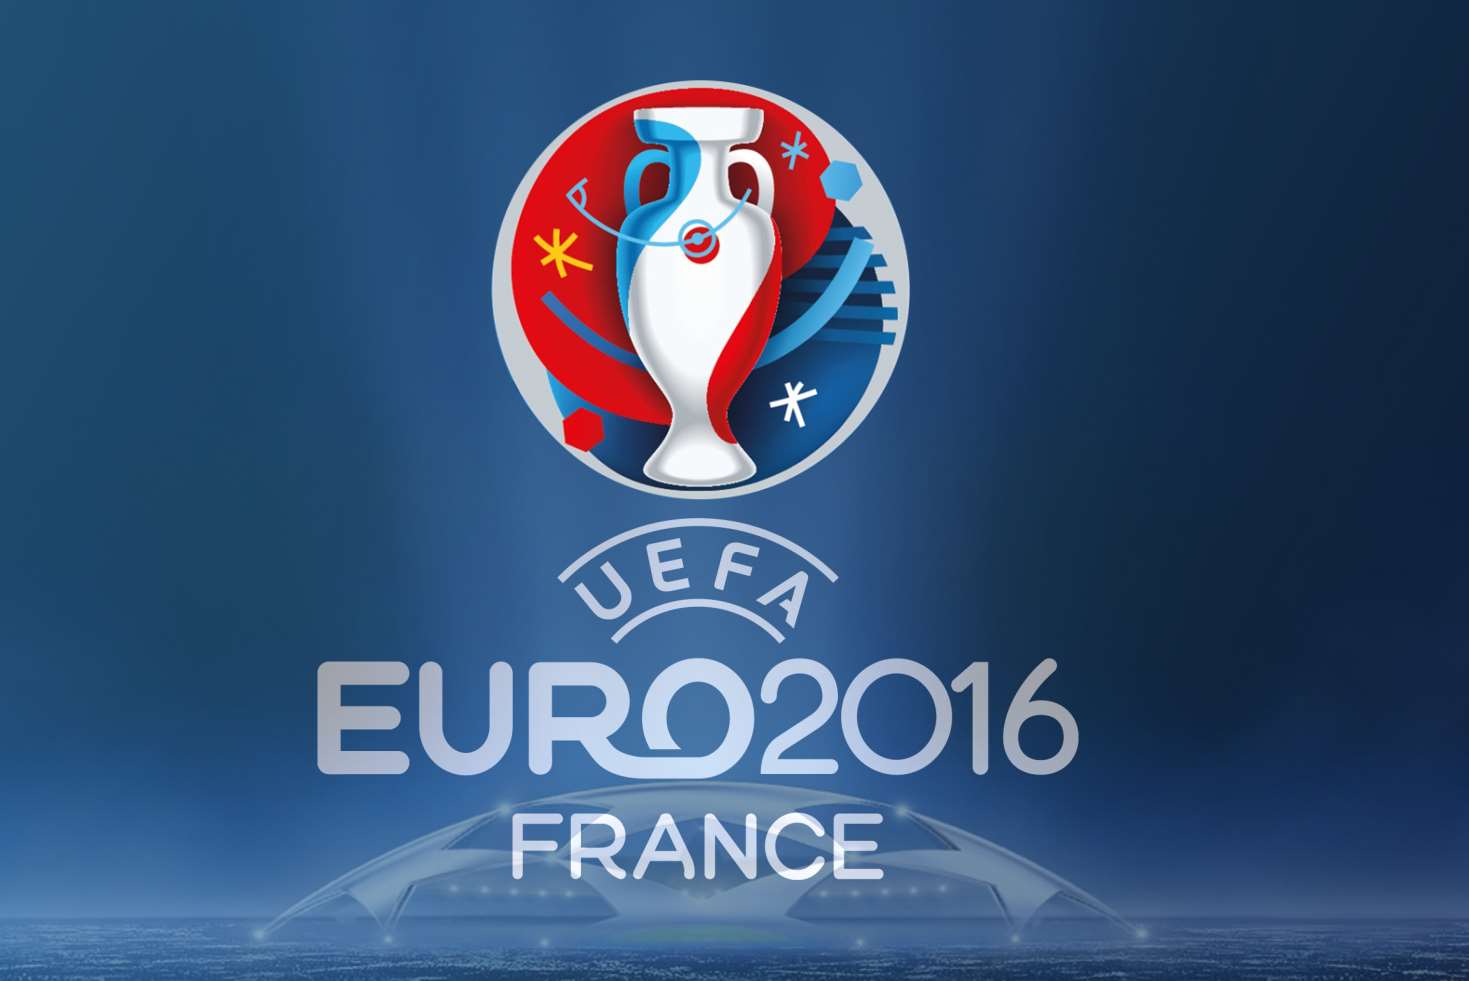 Euro 2016 - ended yesterday with Portugal winning.